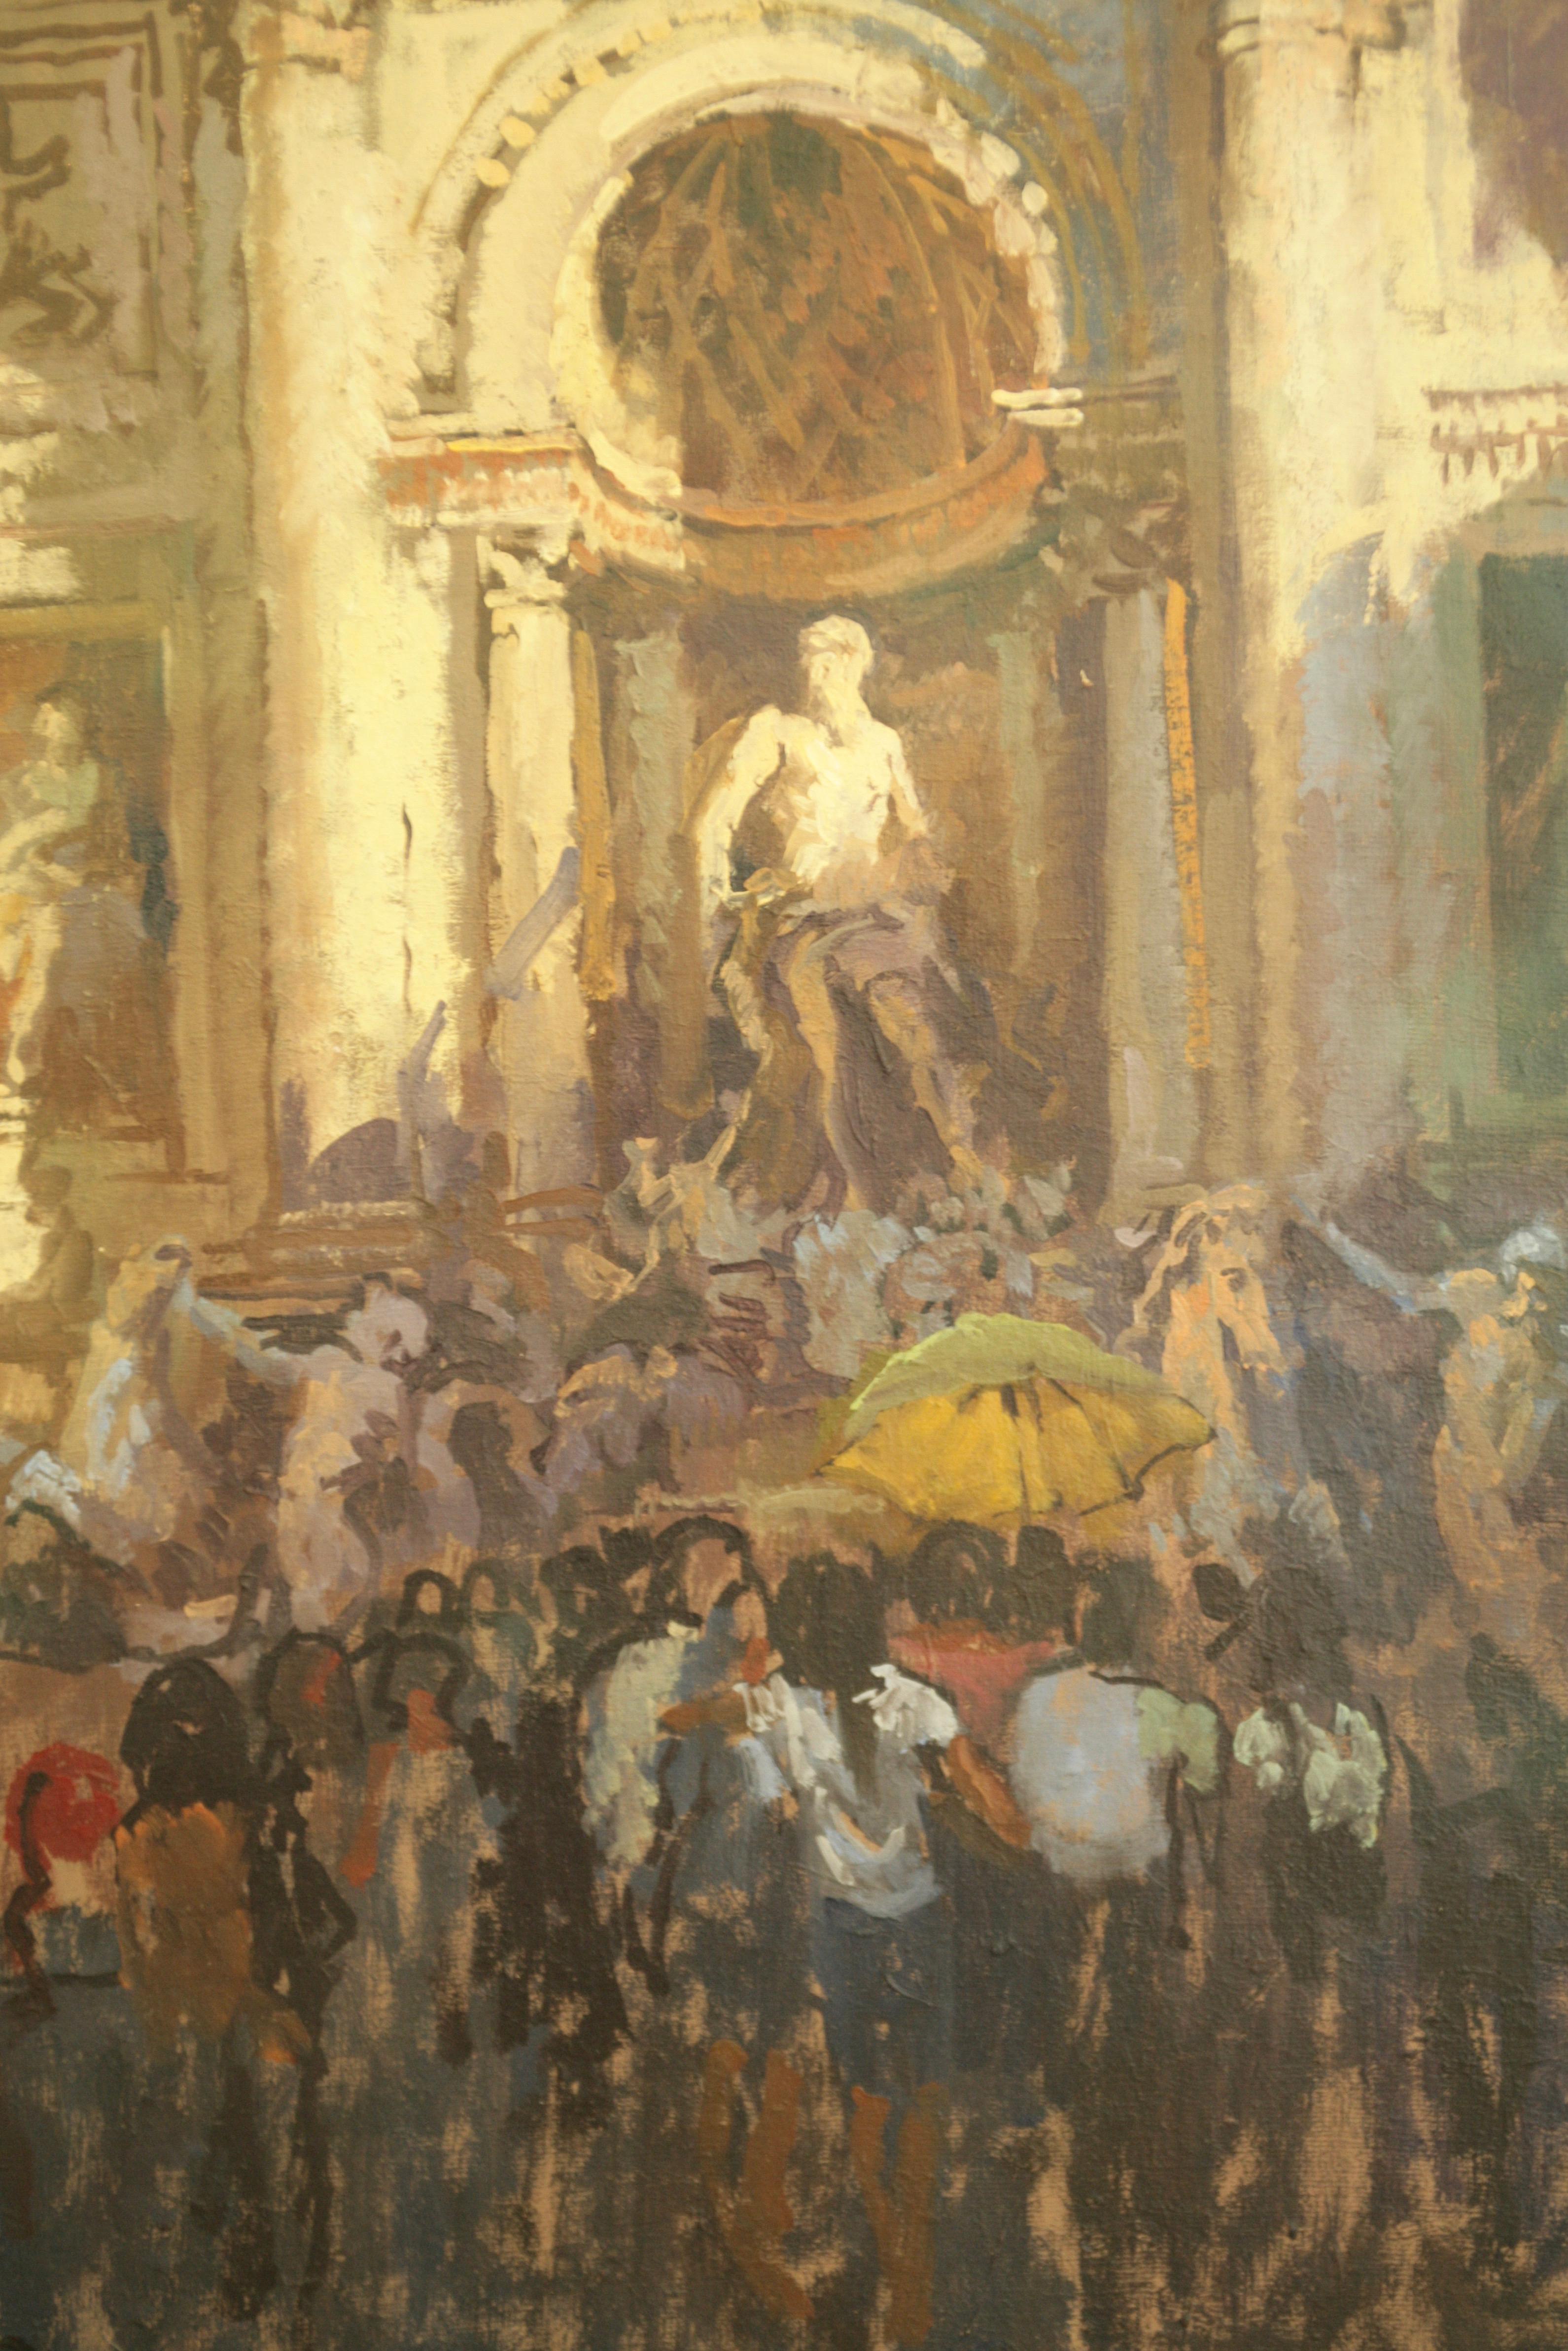 FOUNTAIN TREVI ROME early morning - Painting by Peter Kuhfeld